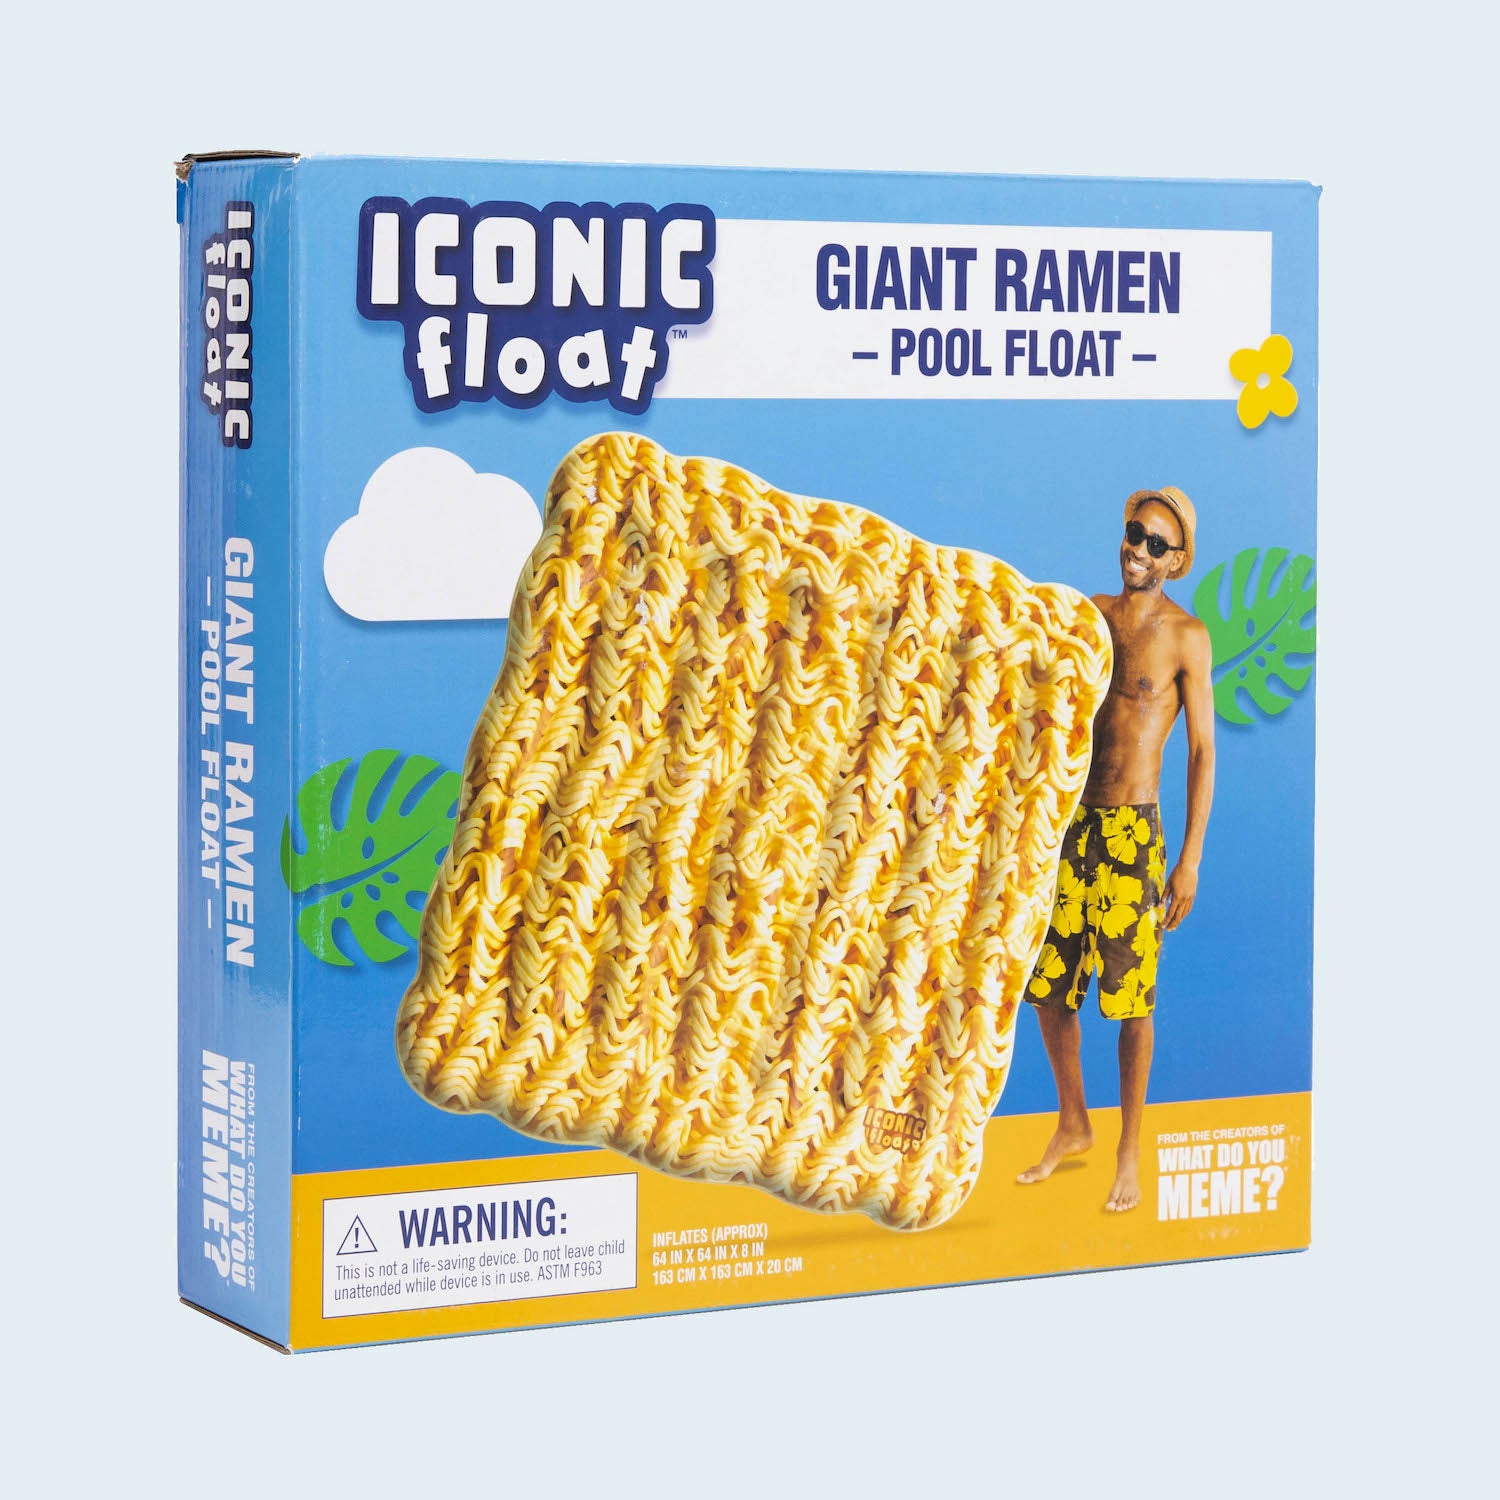 iconic-float-giant-ramen-game-box-and-game-play-01-iconic-float-by-relatable